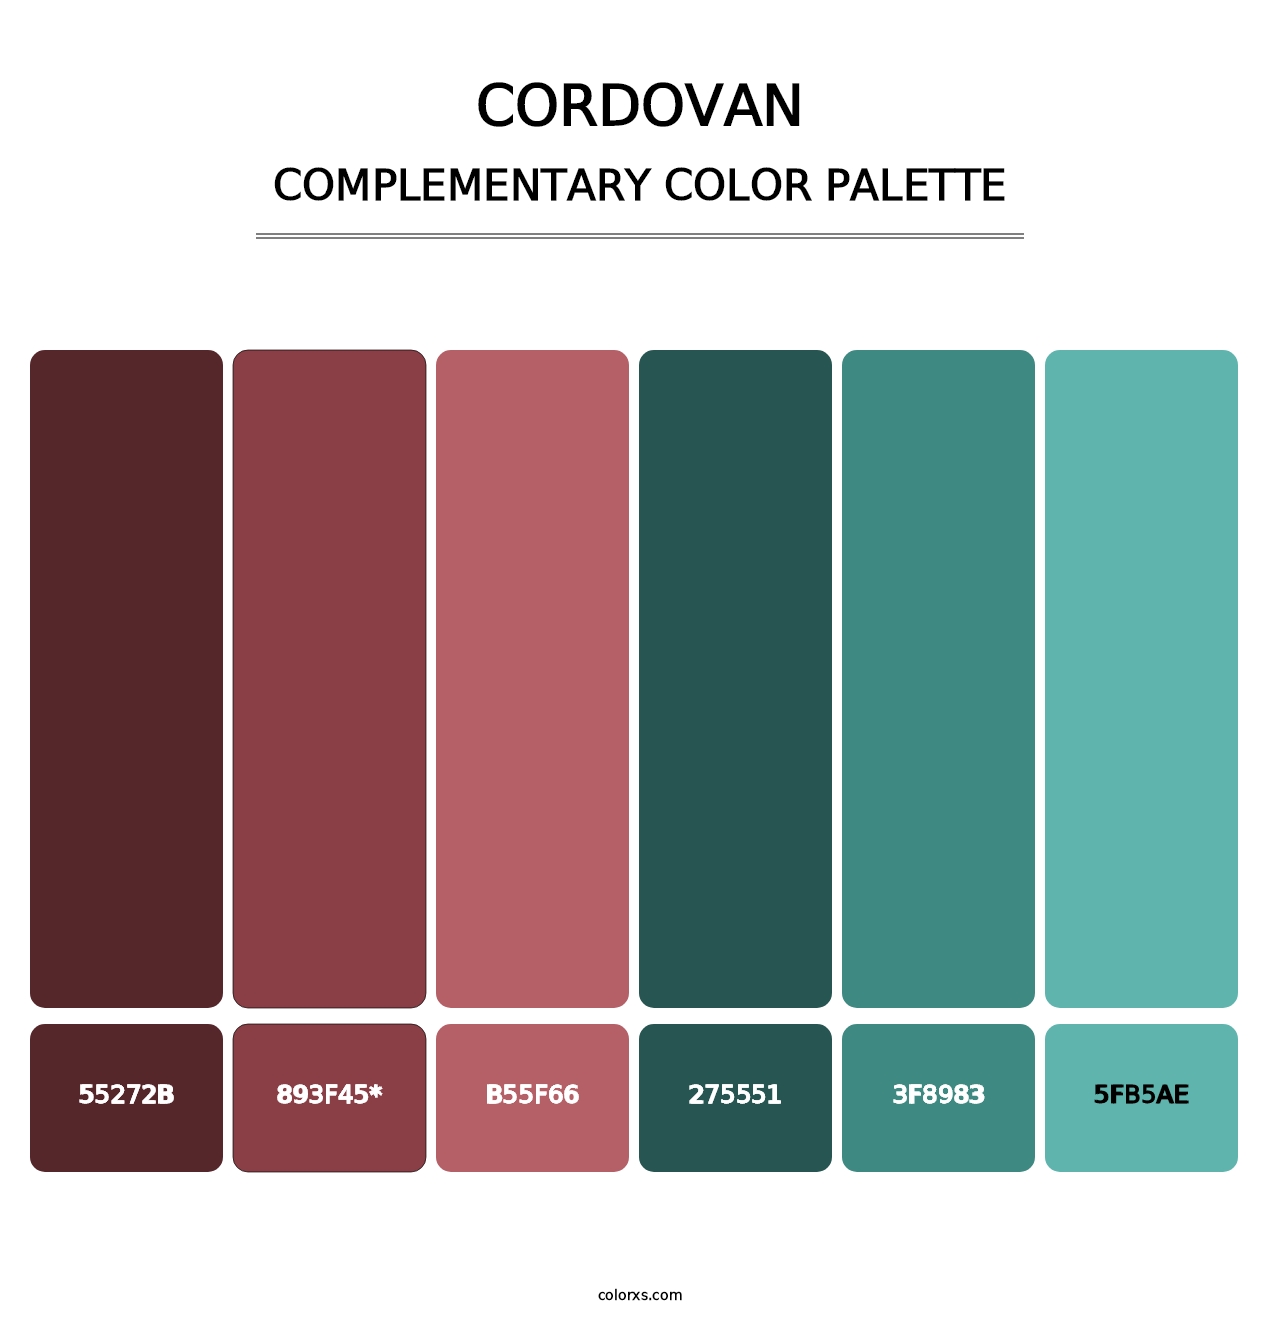 Cordovan - Complementary Color Palette